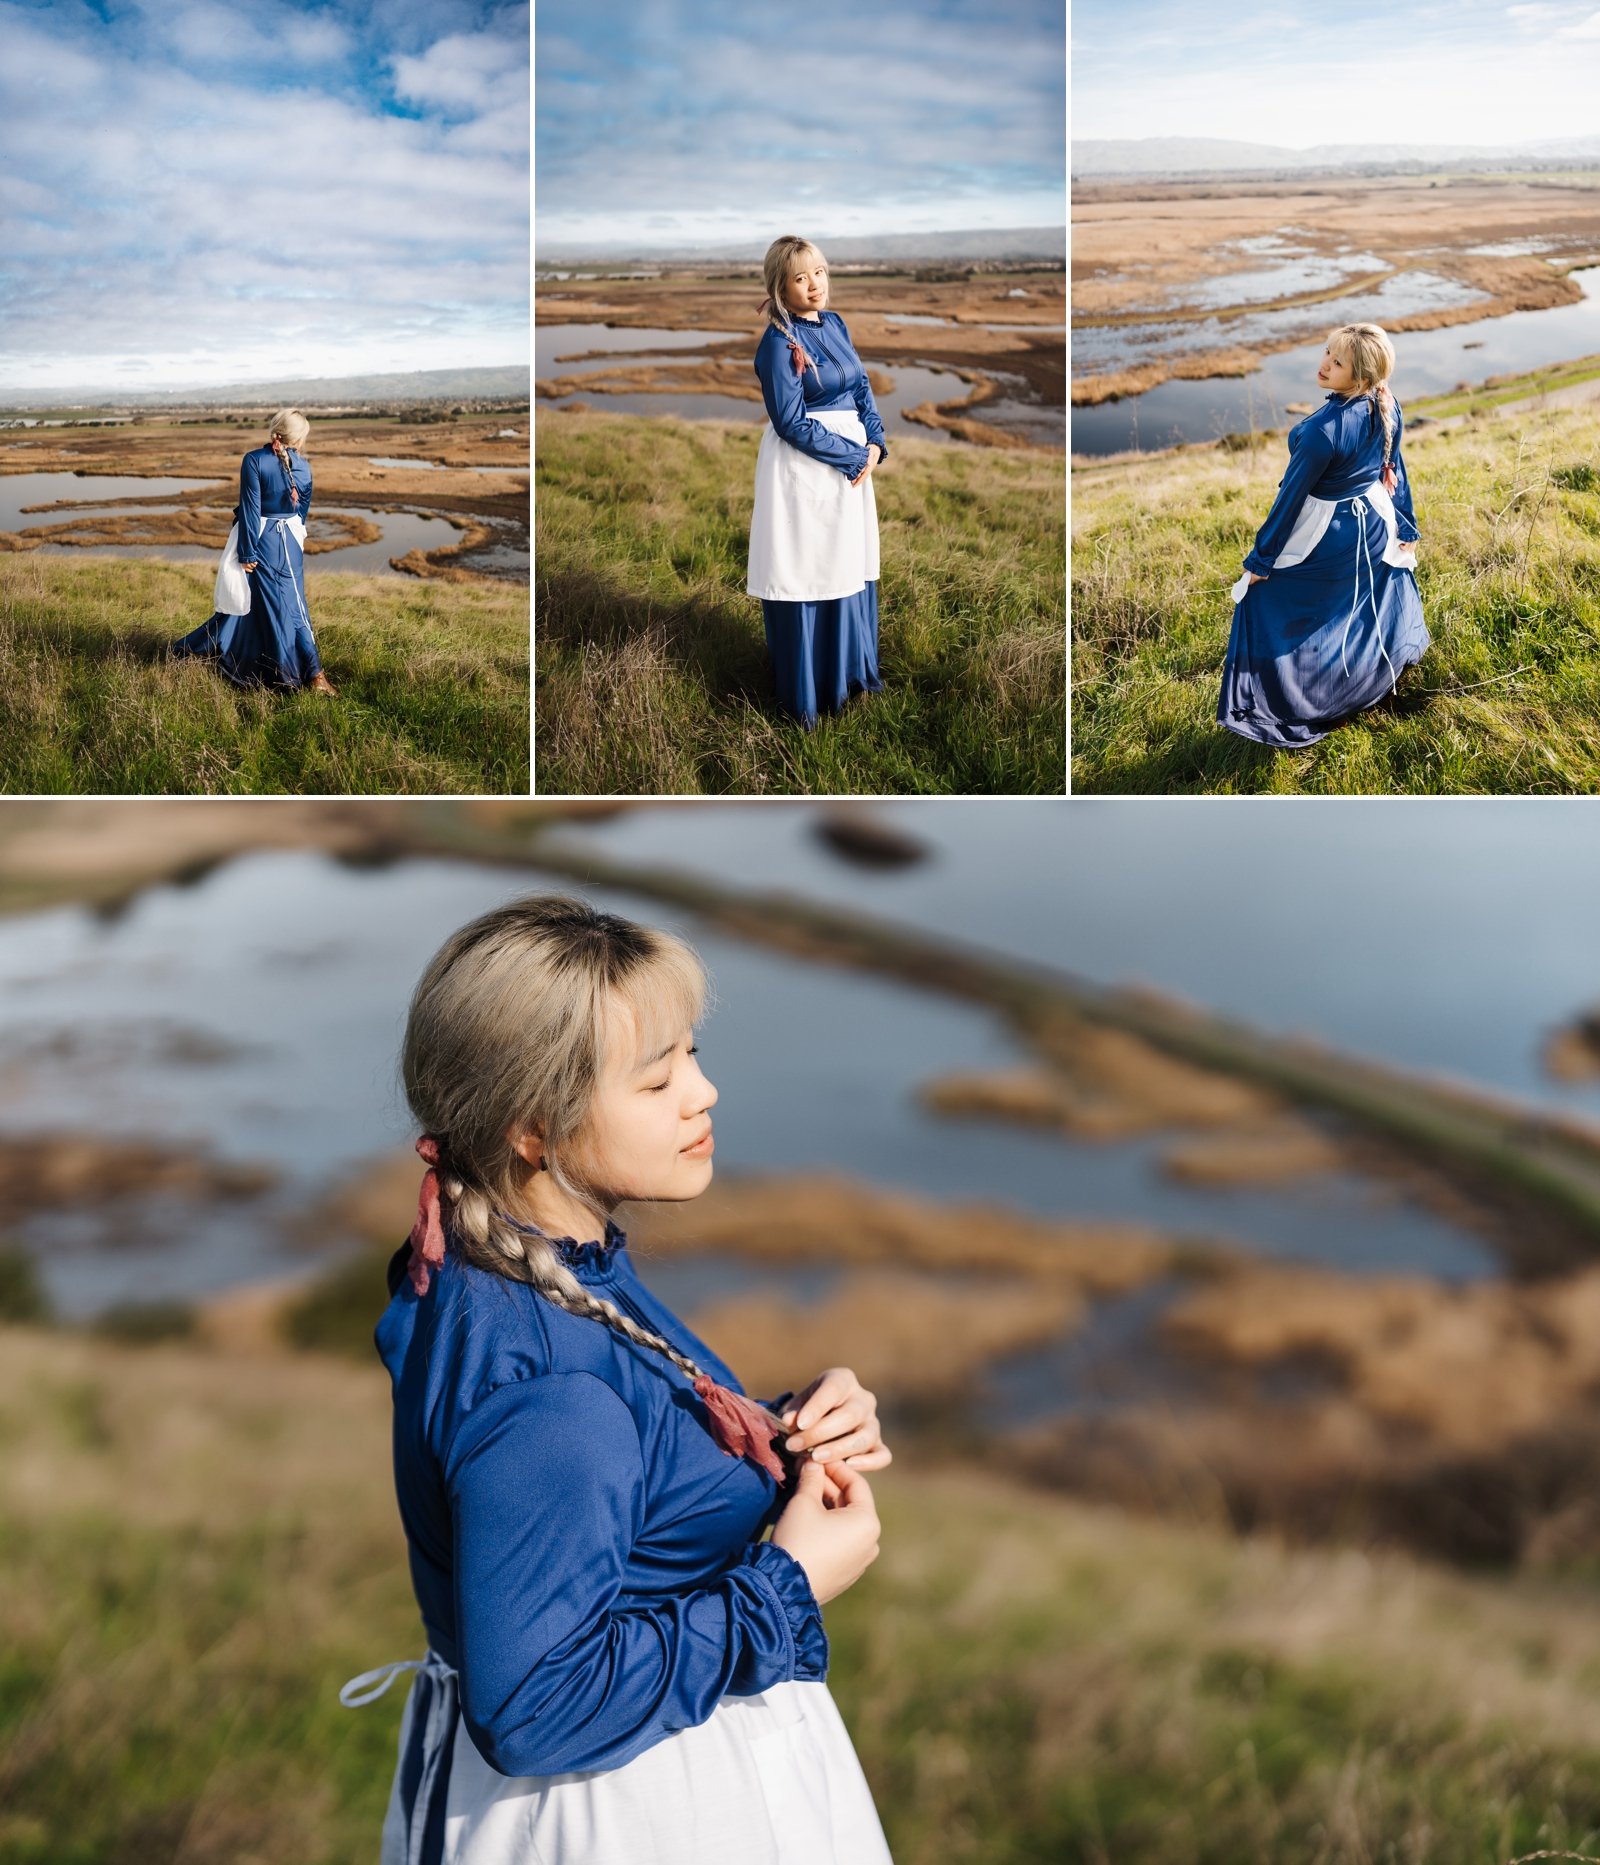 howl's moving castle sophie cosplay photoshoot bay area cosplay photographer 3.jpg